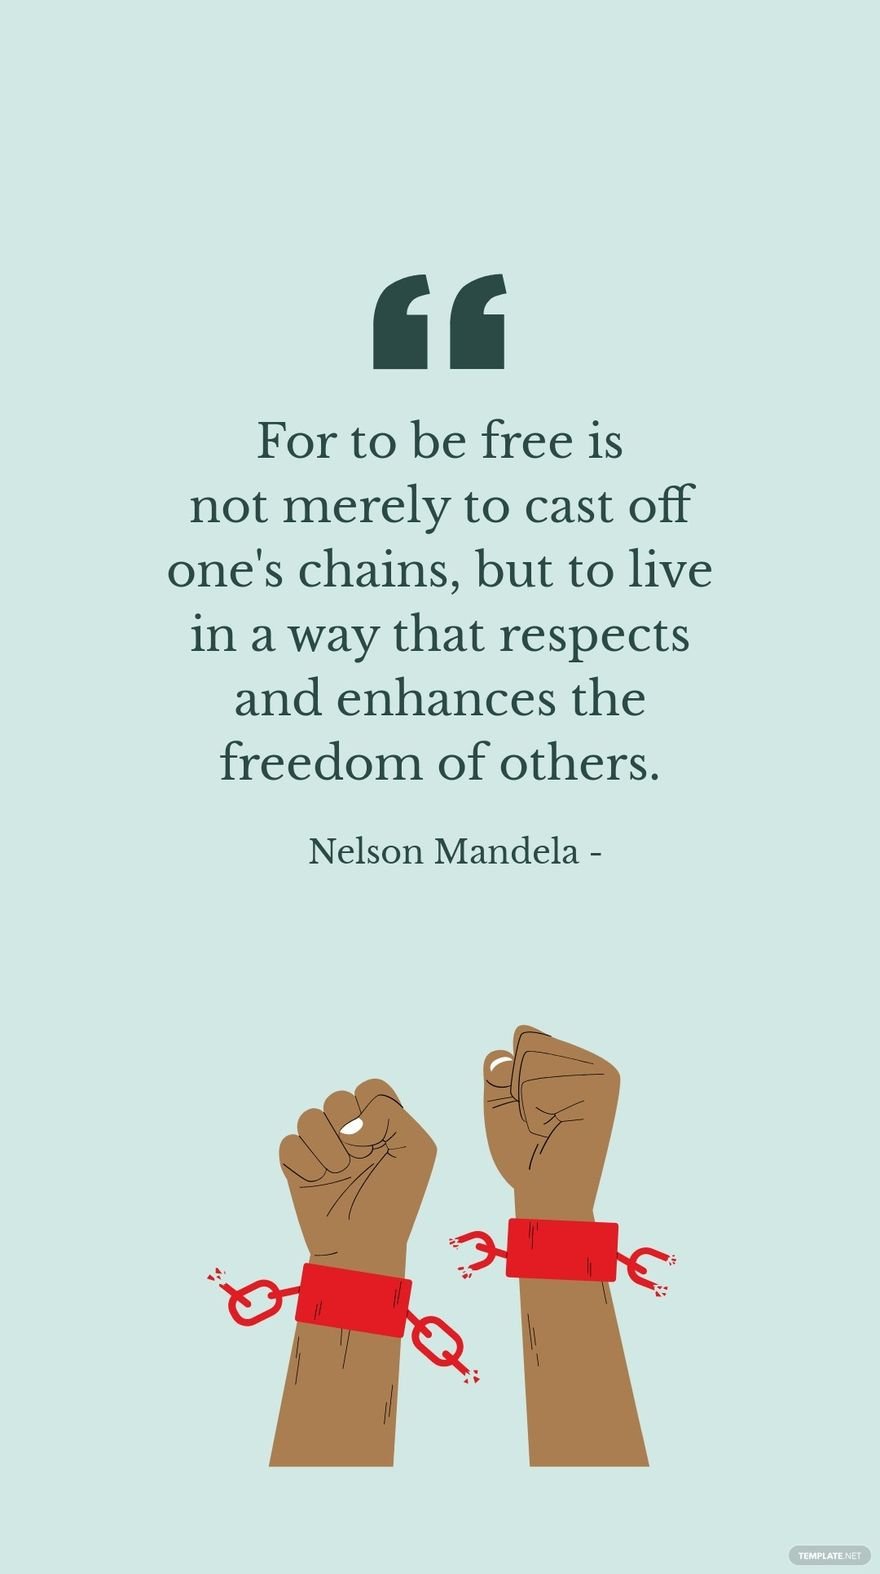 Free Nelson Mandela - For to be is not merely to cast off one's chains, but to live in a way that respects and enhances the freedom of others. in JPG